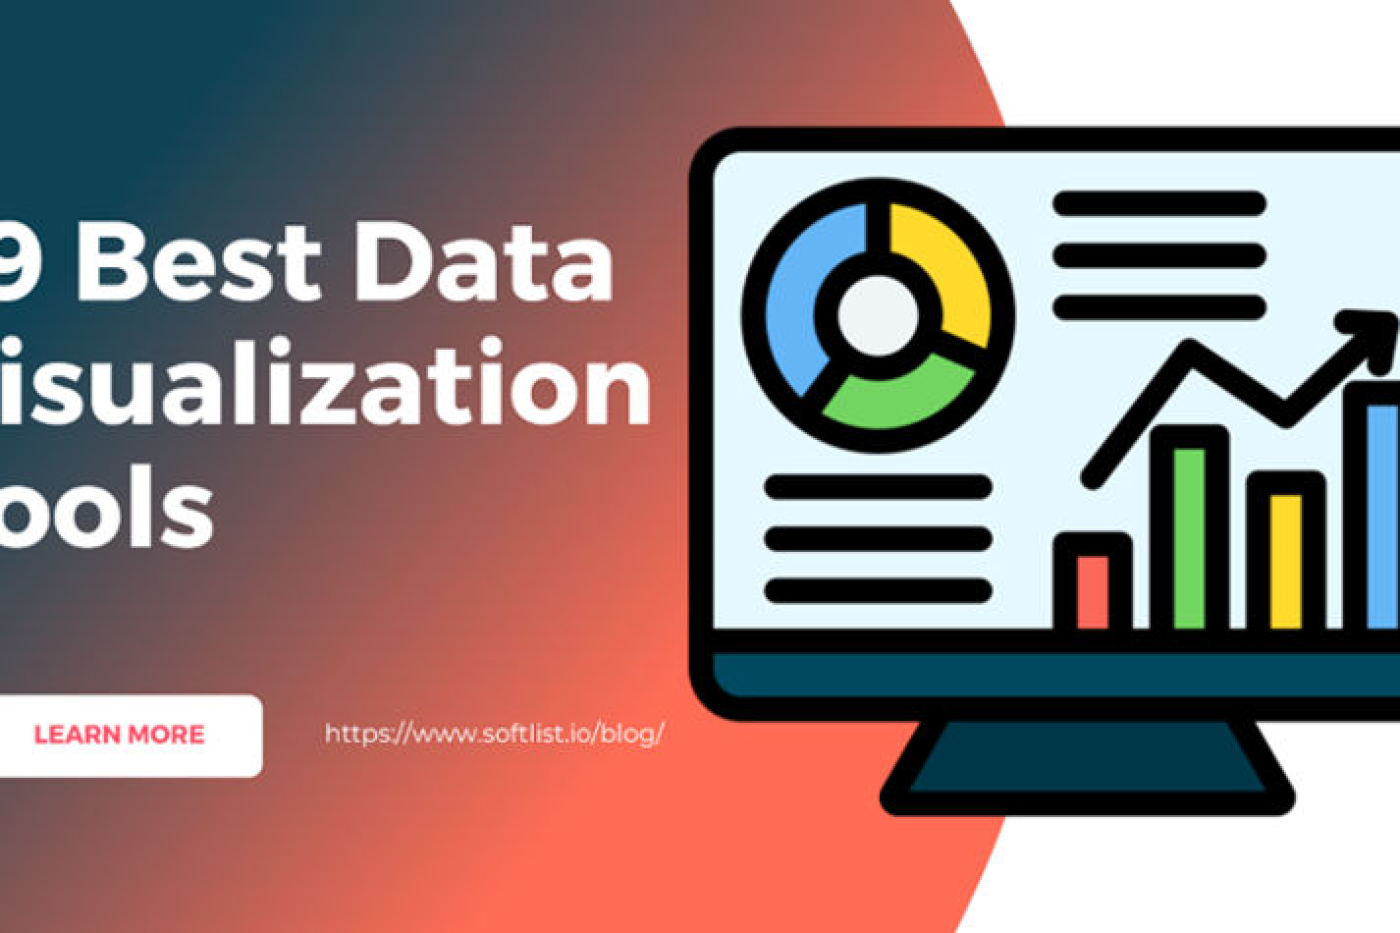 Exploring the 39 Best Data Visualization Tools